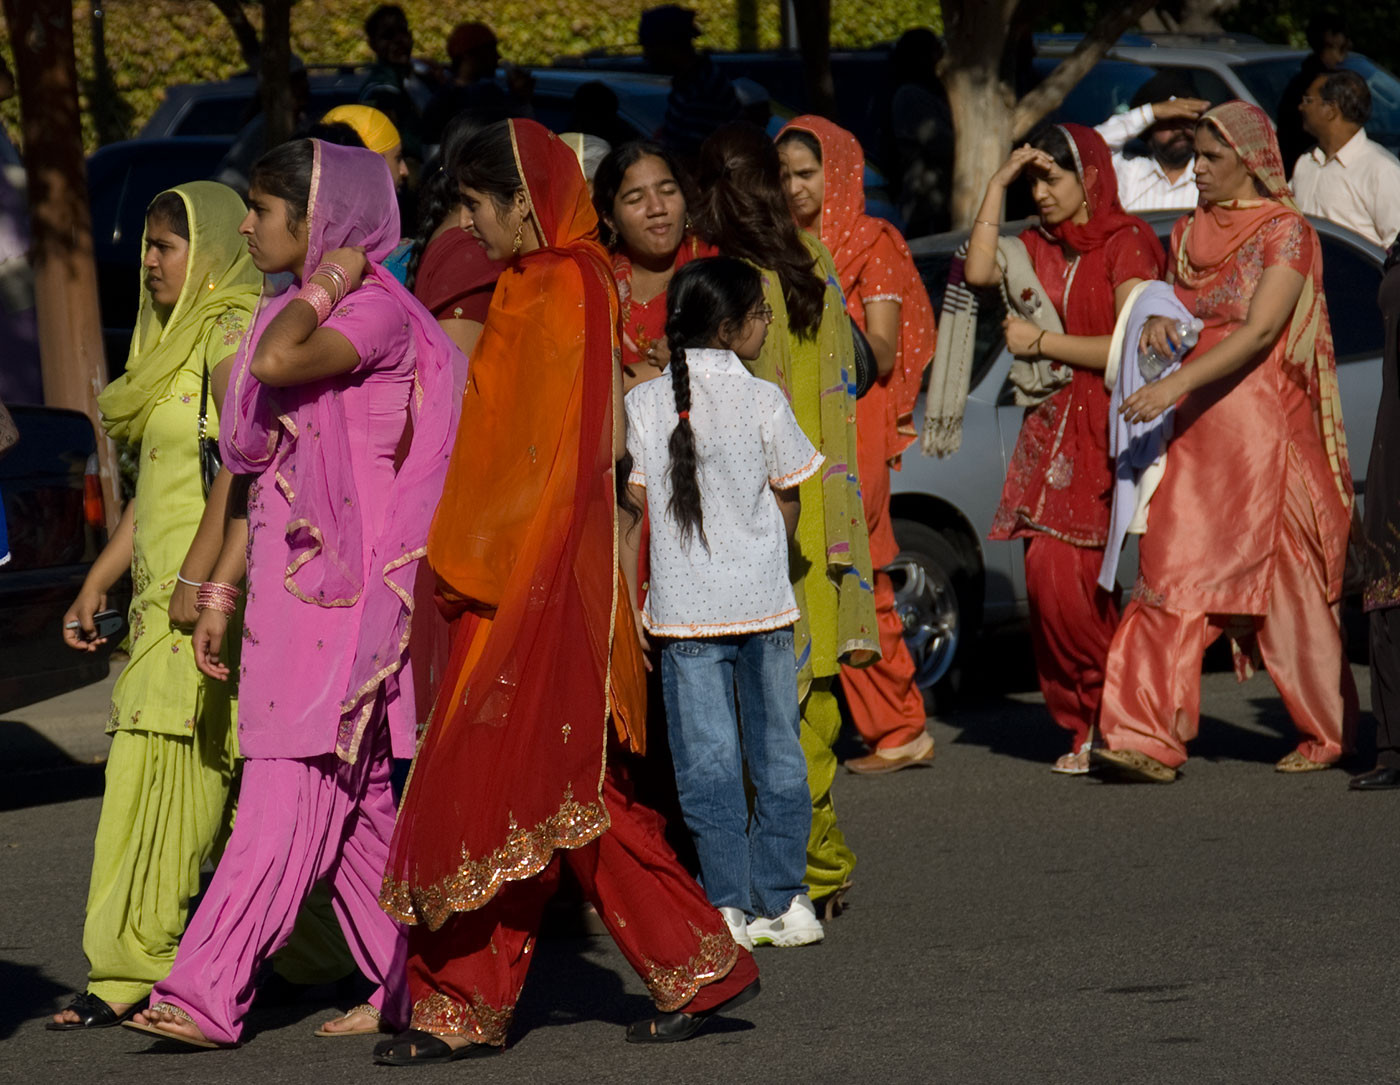 Photo of a group of colorfully dressed women in Yuba City during a parade by Marge d'Wylde